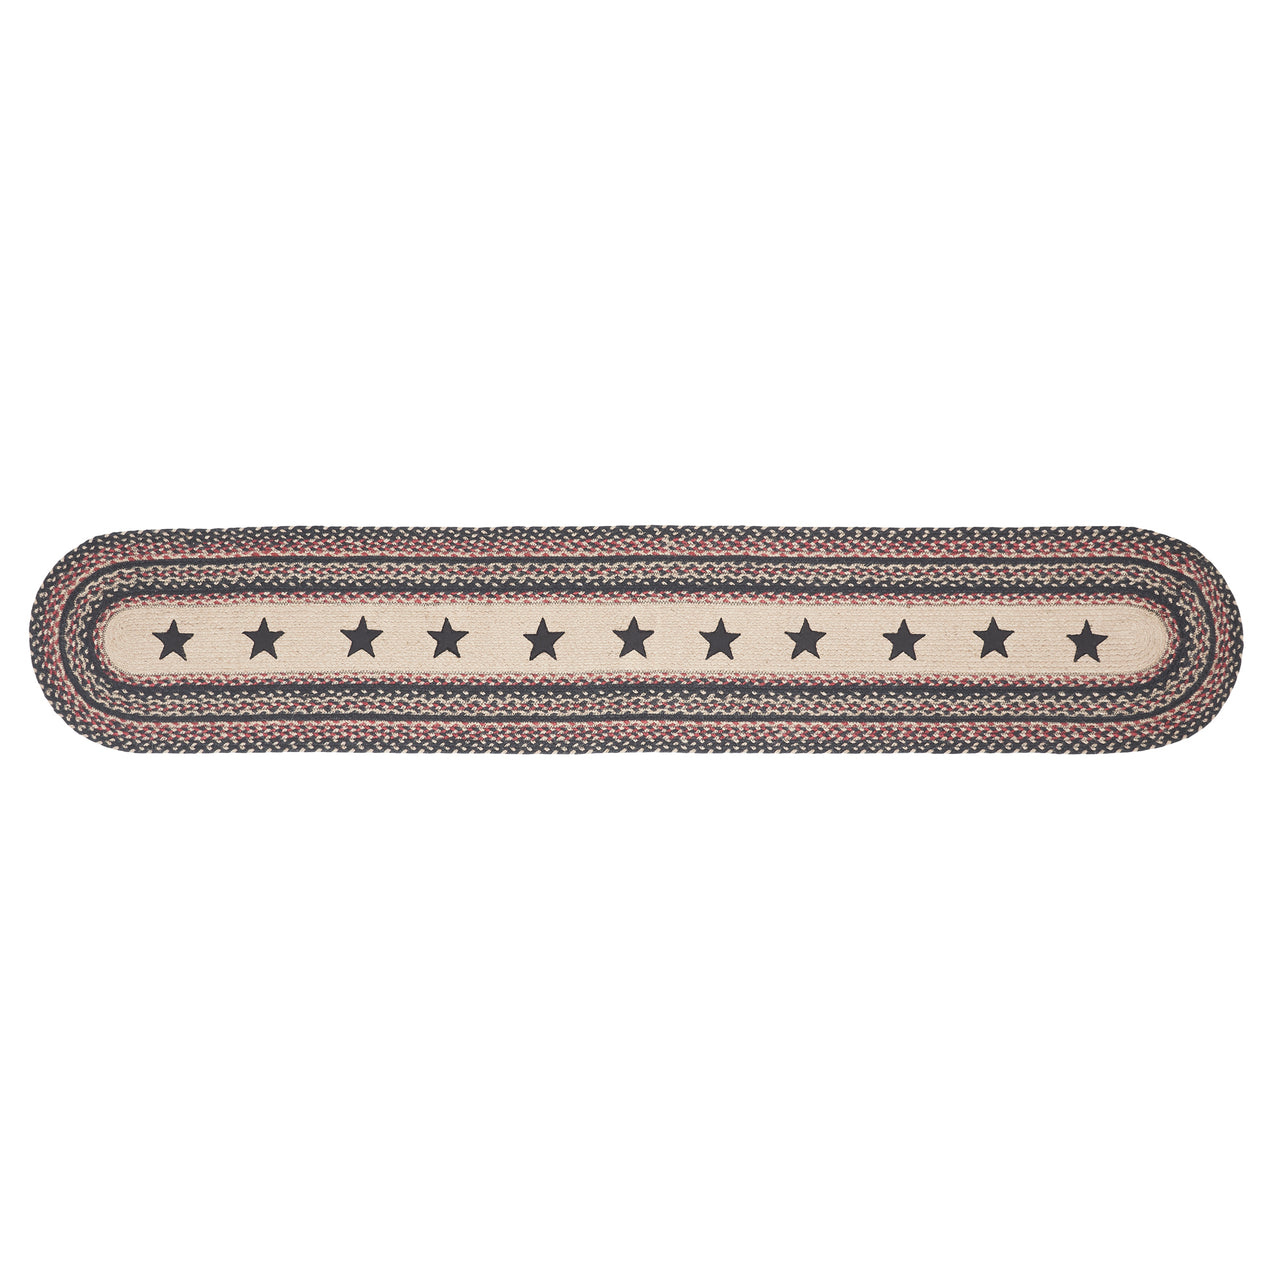 Colonial Star Jute Braided Oval Runner 13x72 VHC Brands